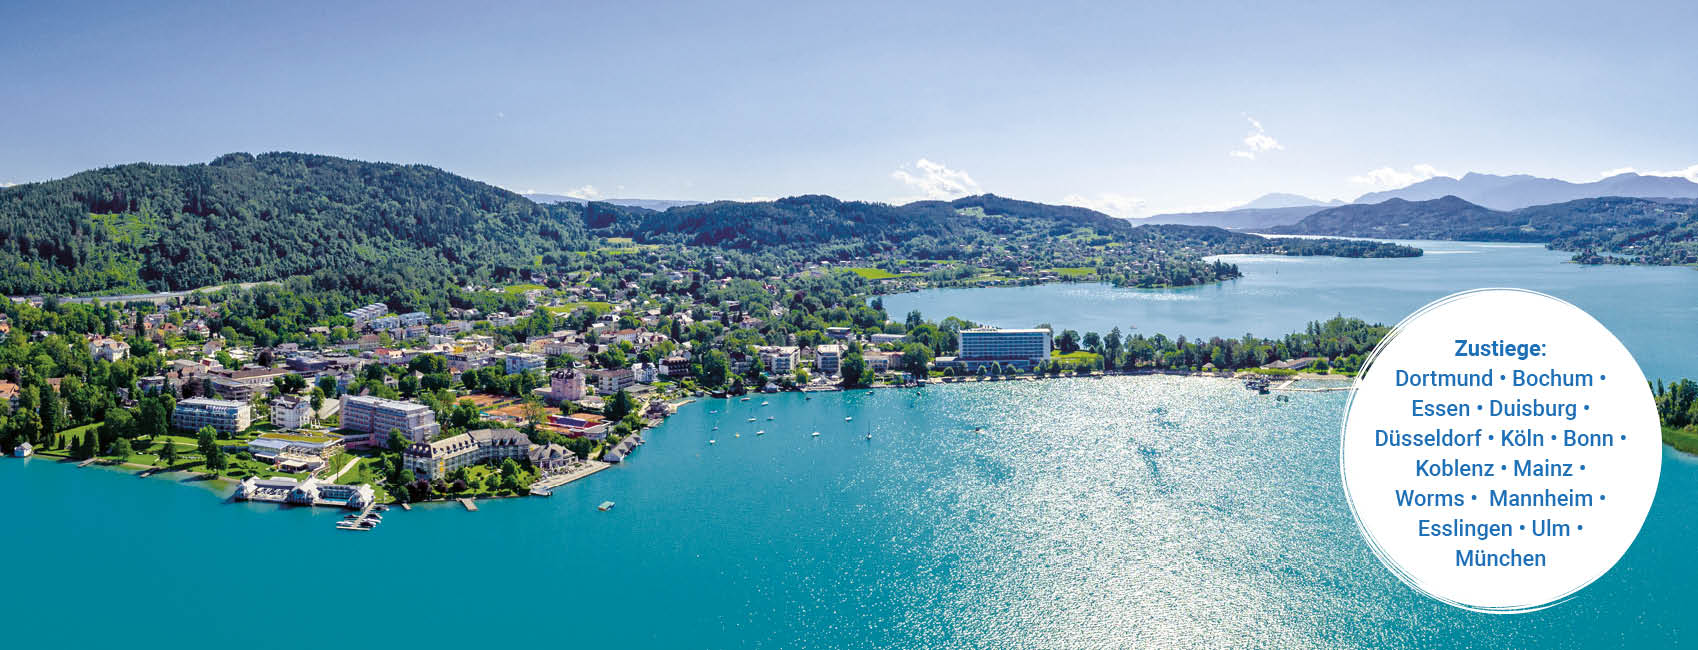 MT_09_Wörthersee_01.-08.09.24